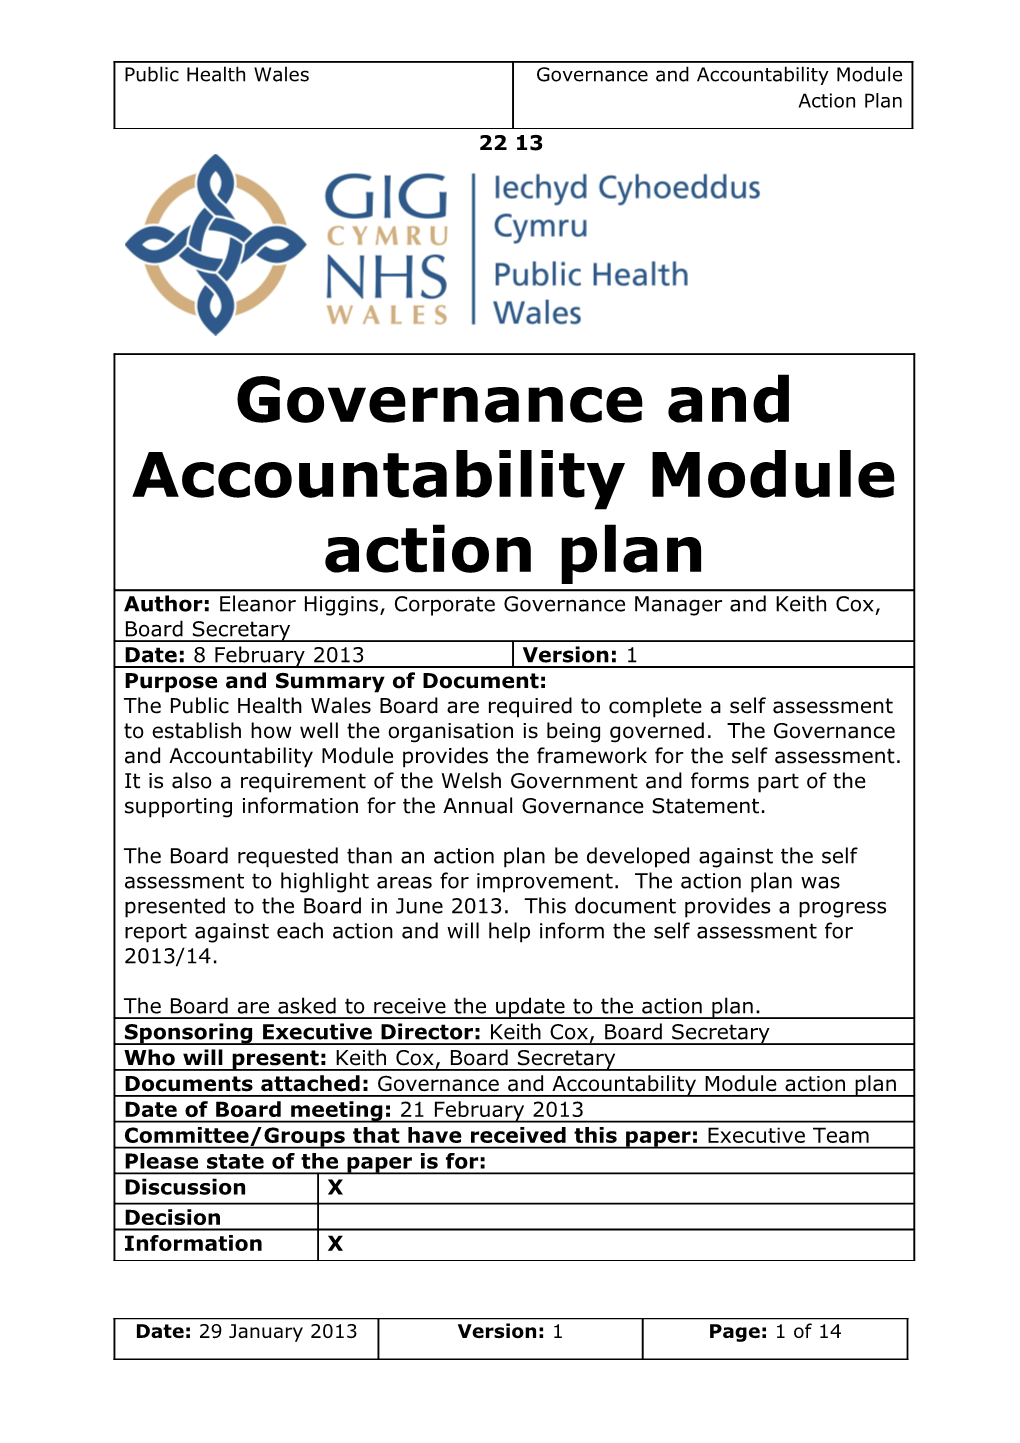 Governance and Accountability Module Action Plan